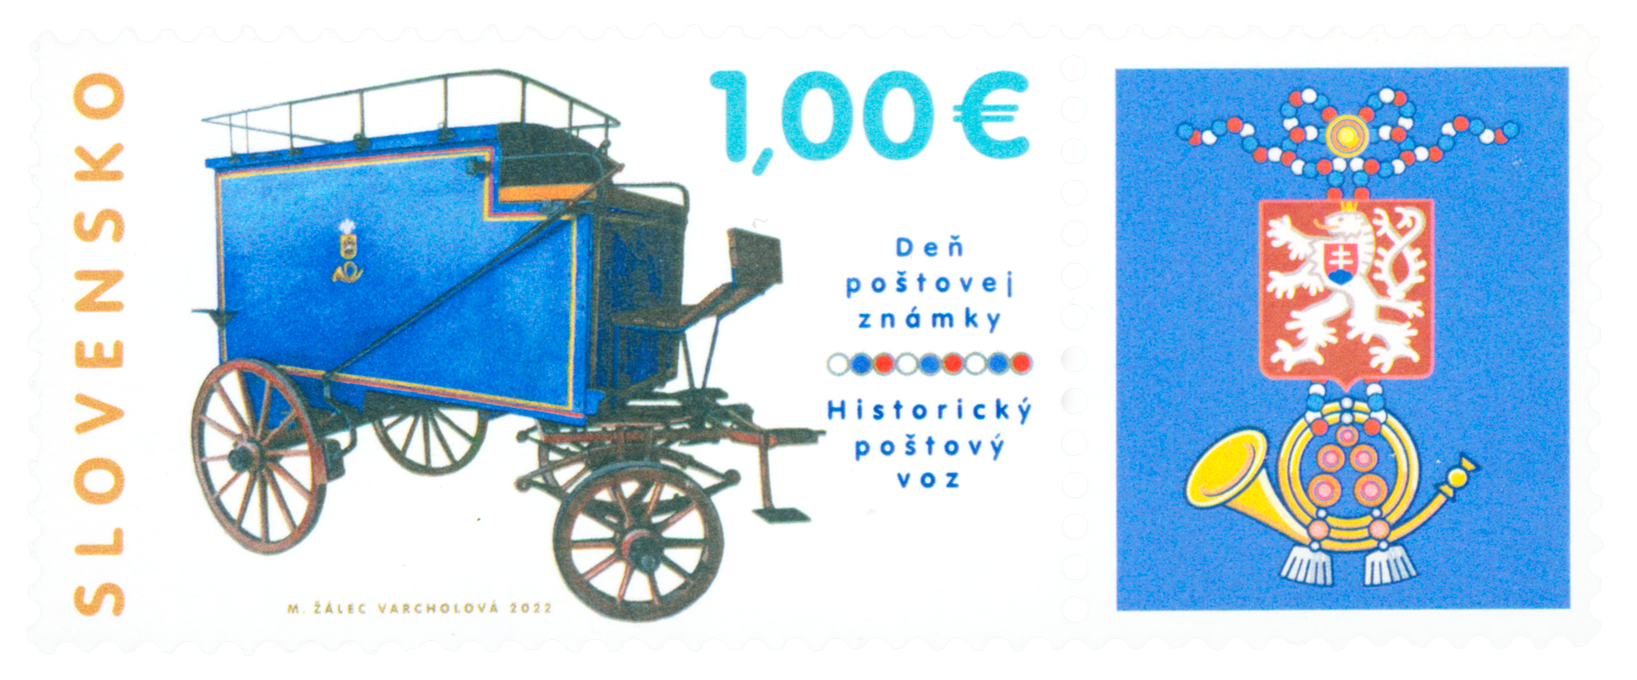 783 - Postage Stamp Day: A Historical Mail Waggon